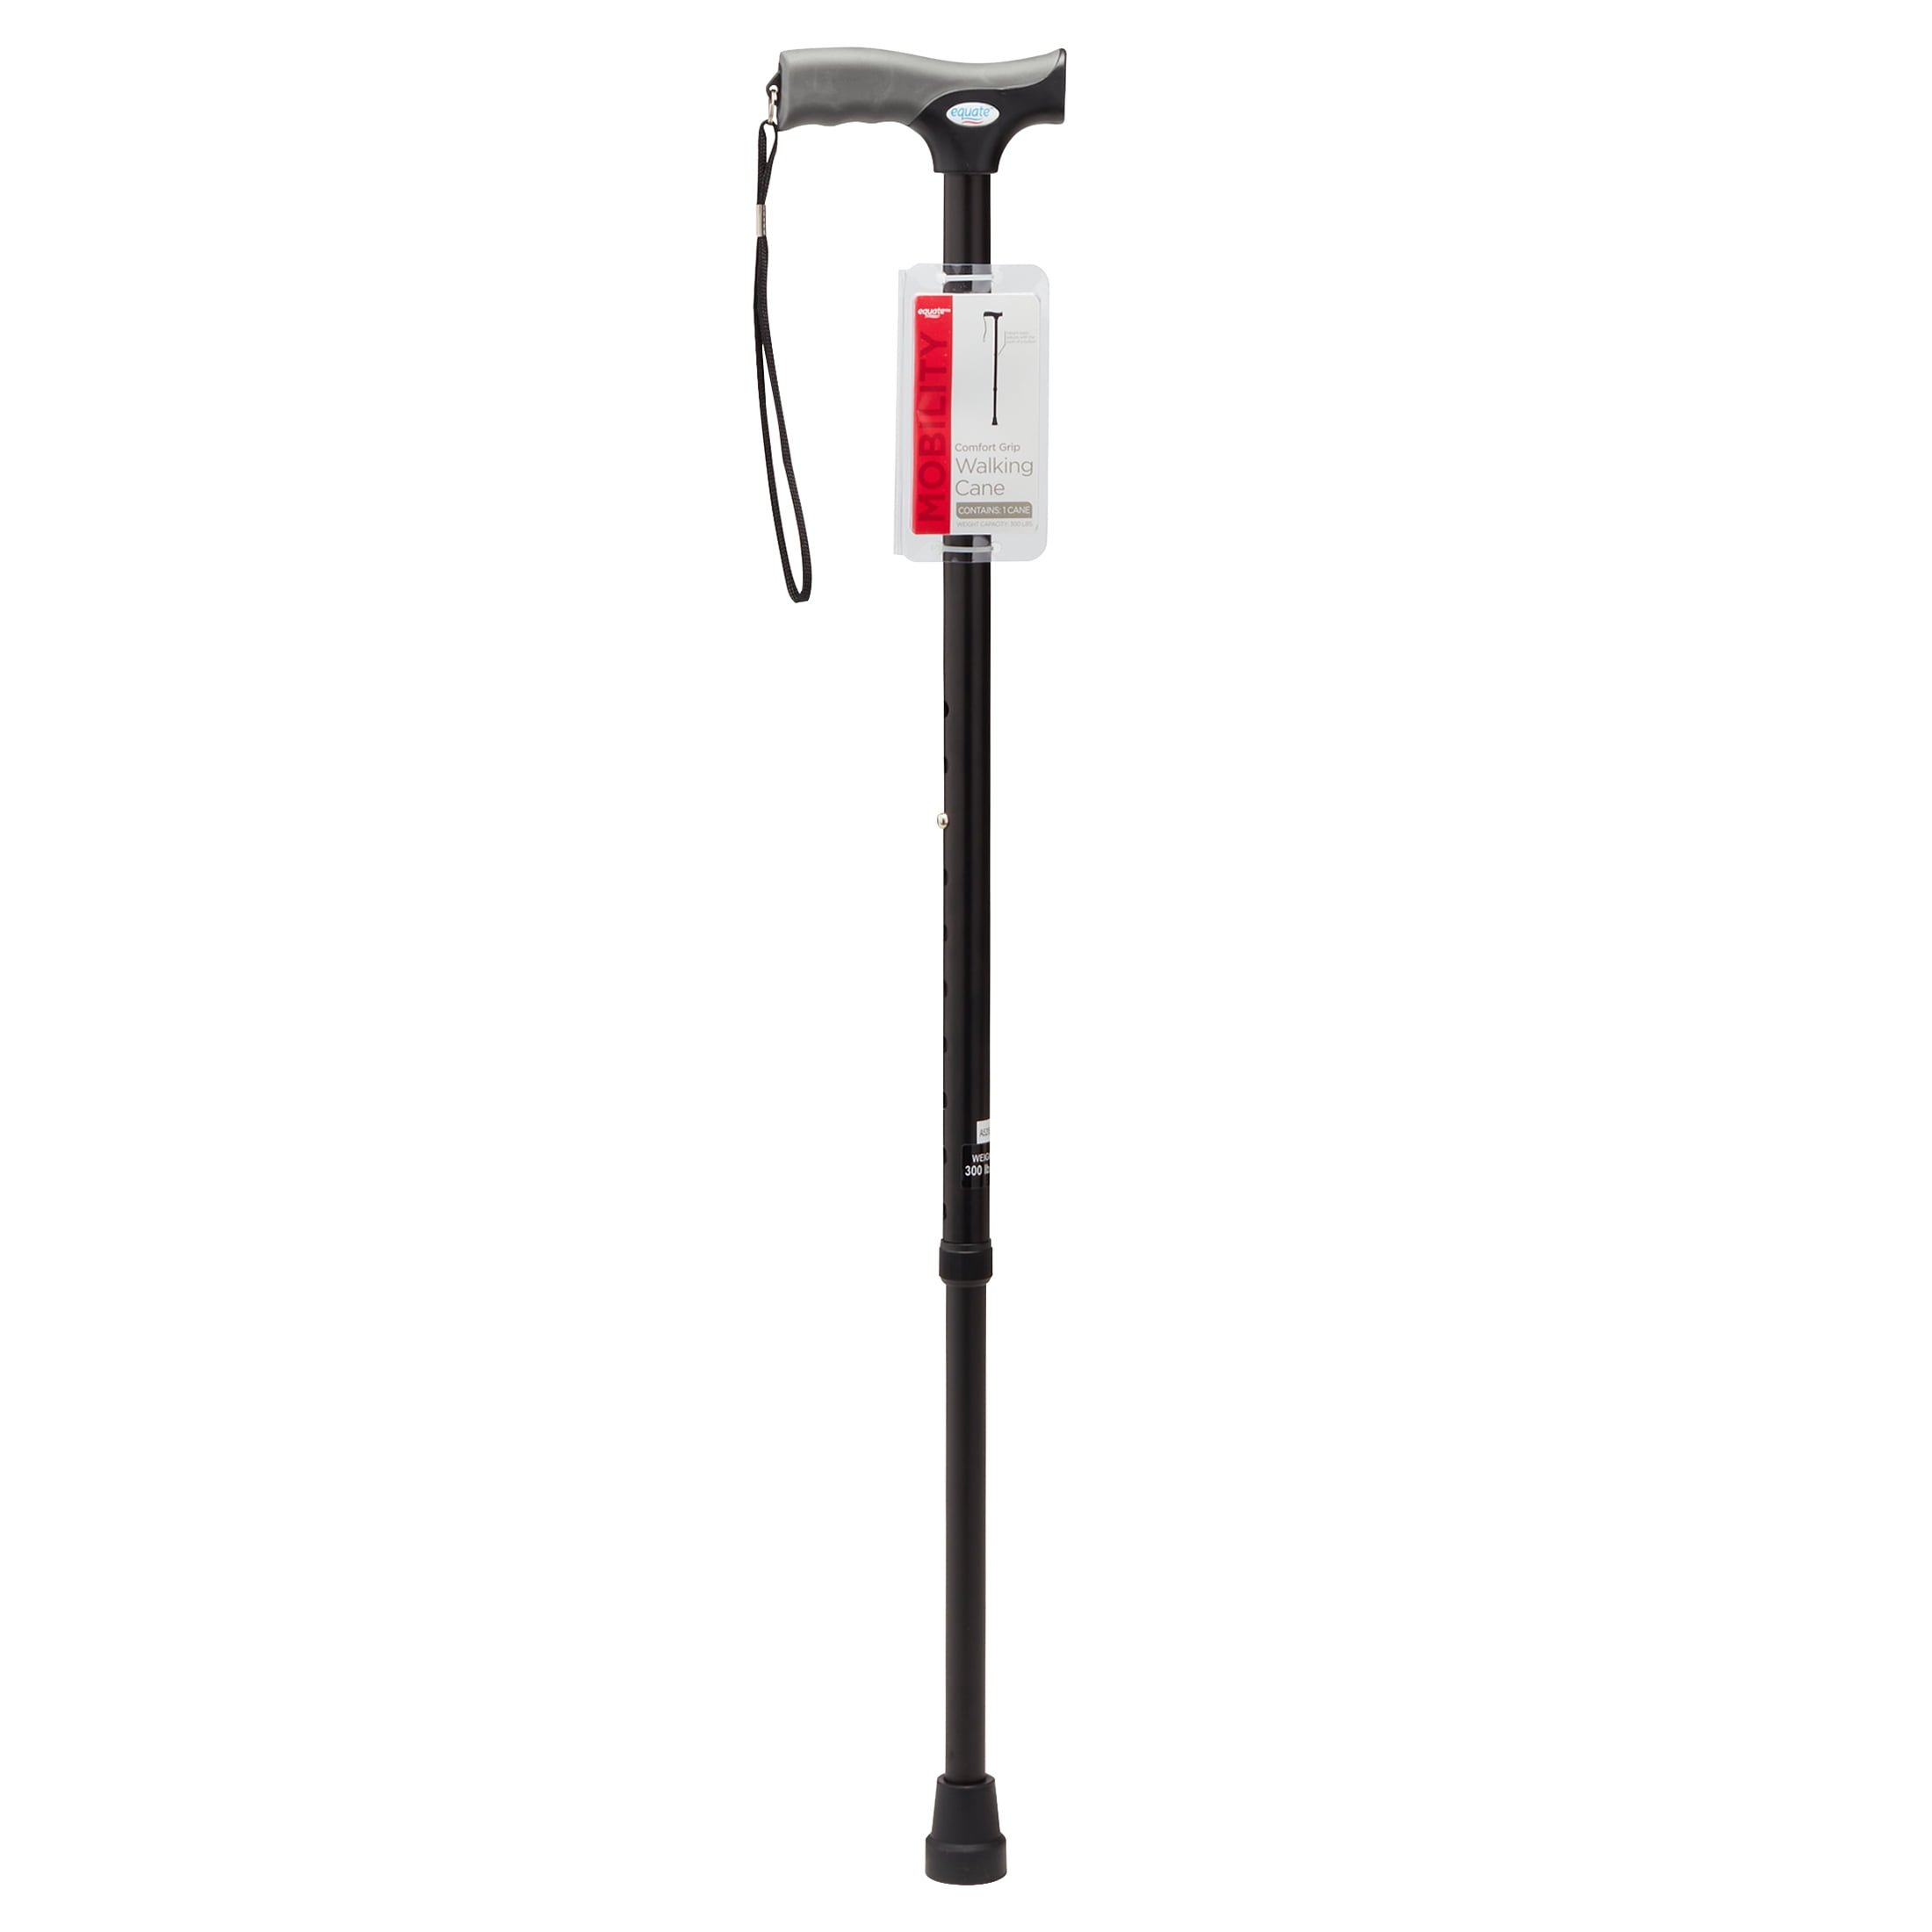 Equate Comfort Grip Walking Cane, Height Adjustable Cane With Wrist Strap, Black